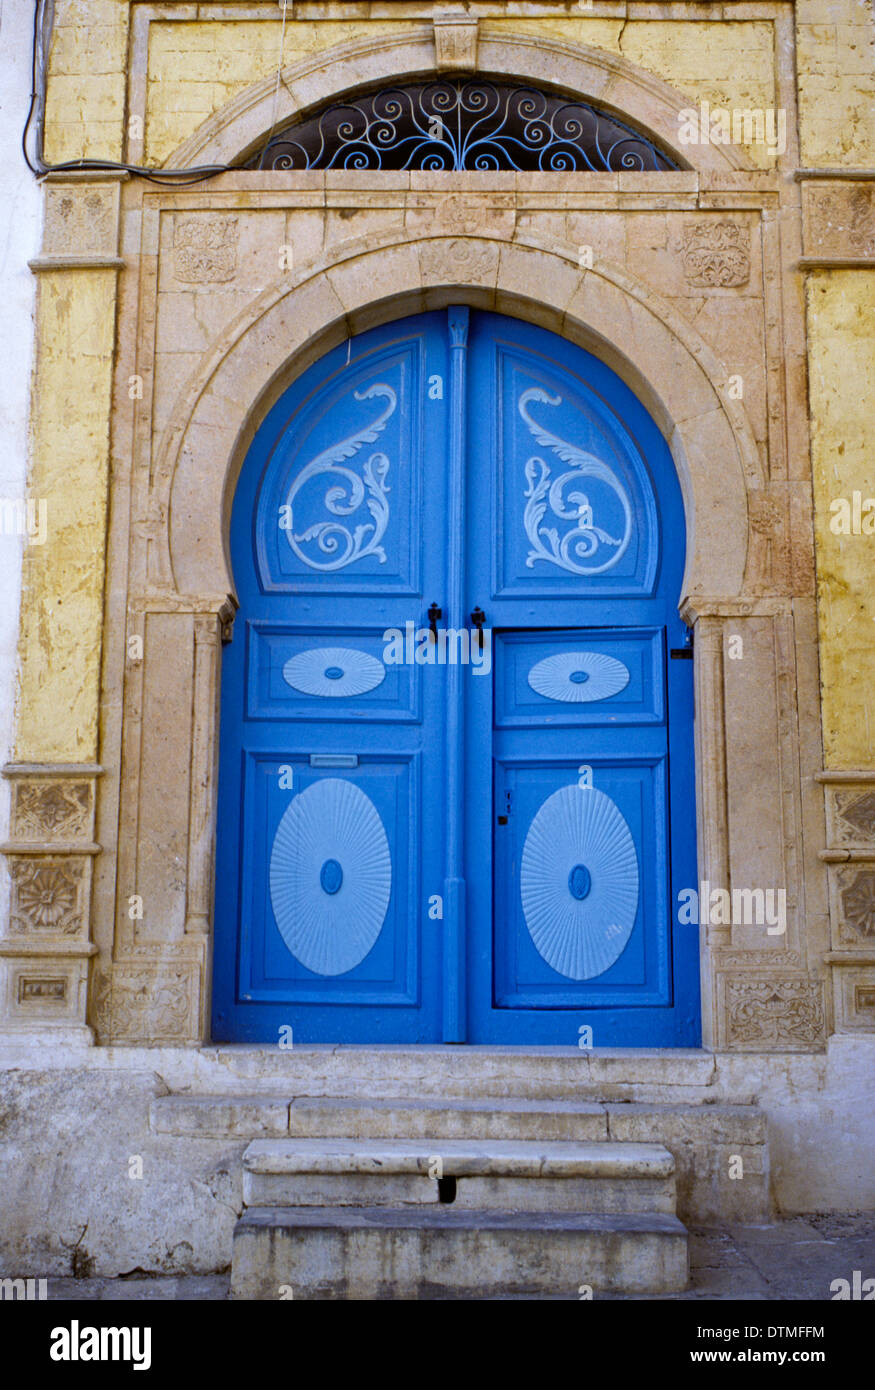 Tunisia, Sidi Bou Said. Carved Stonework Portal Surrounding Painted Blue  Door, Entrance to a Private Home Stock Photo - Alamy